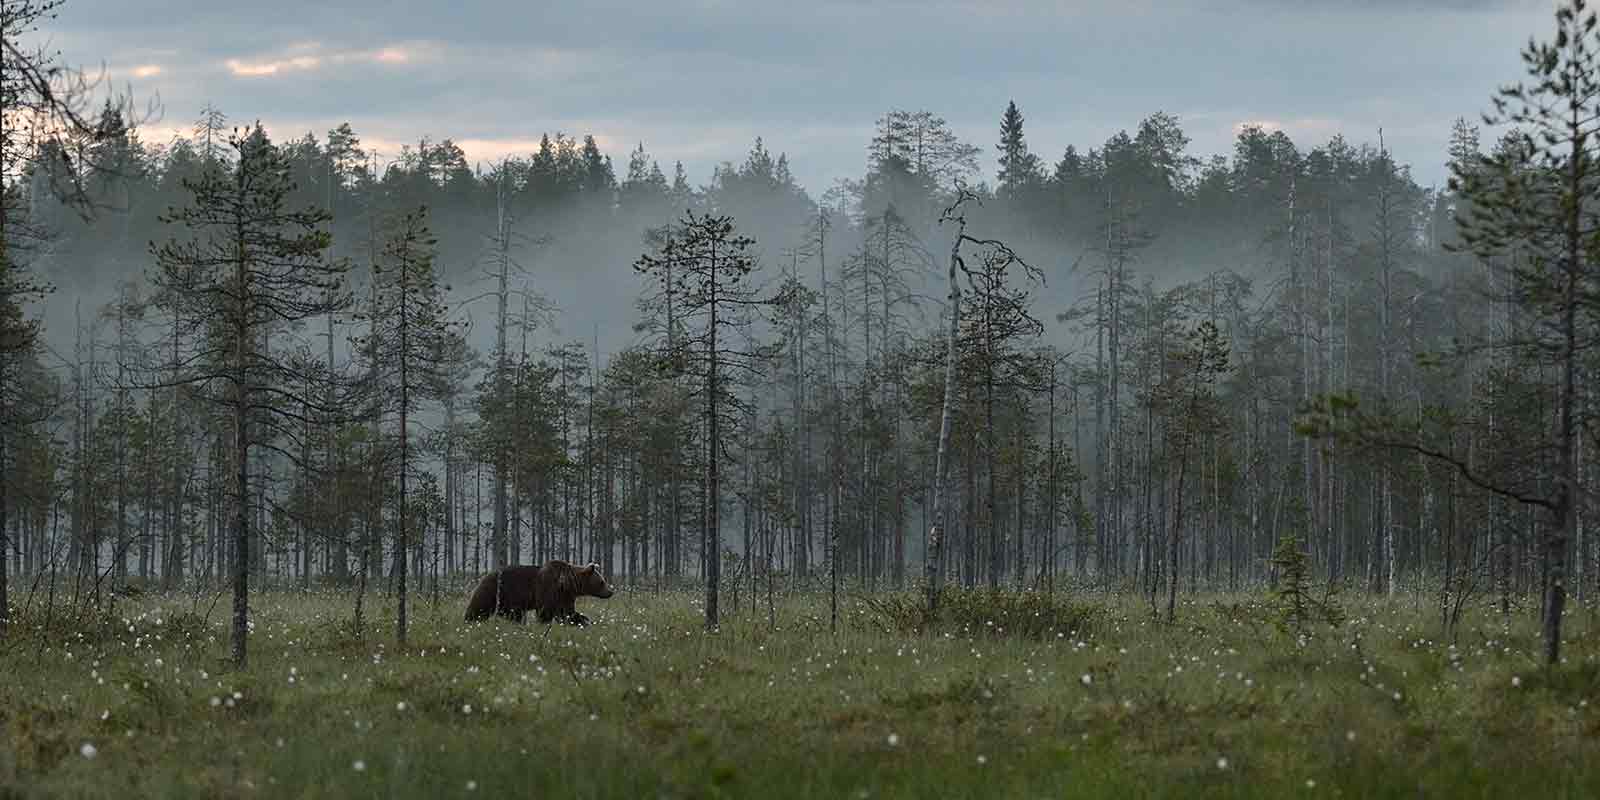 Brown bear in the Taiga forest of Finland at twilight